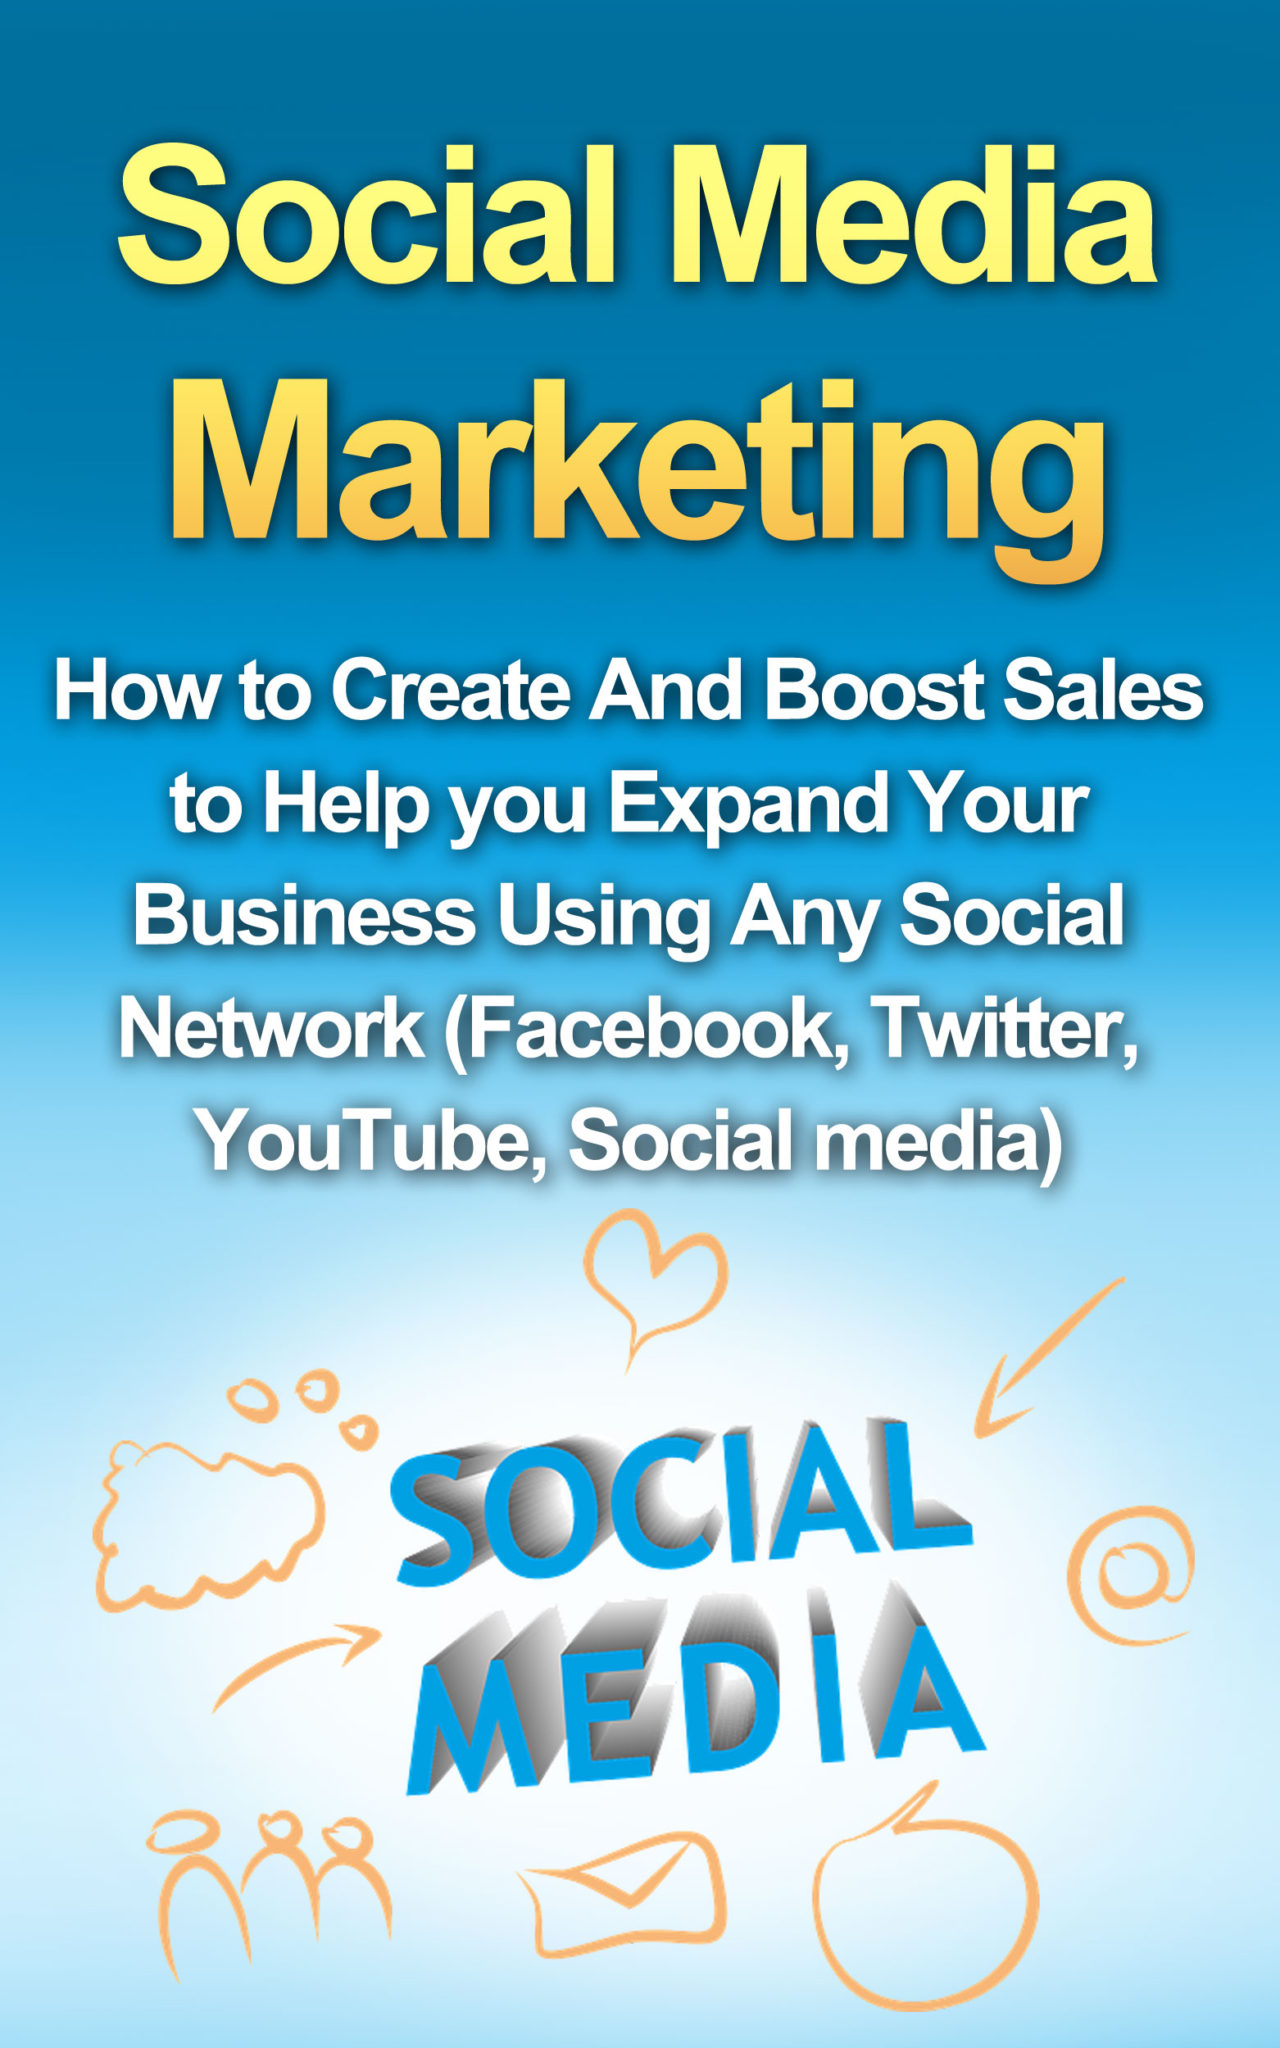 FREE: Social Media Marketing: How to Create And Boost Sales to Help you Expand Your Business Using Any Social Network (Facebook, Twitter, YouTube, Social Media) by Richard Harrison